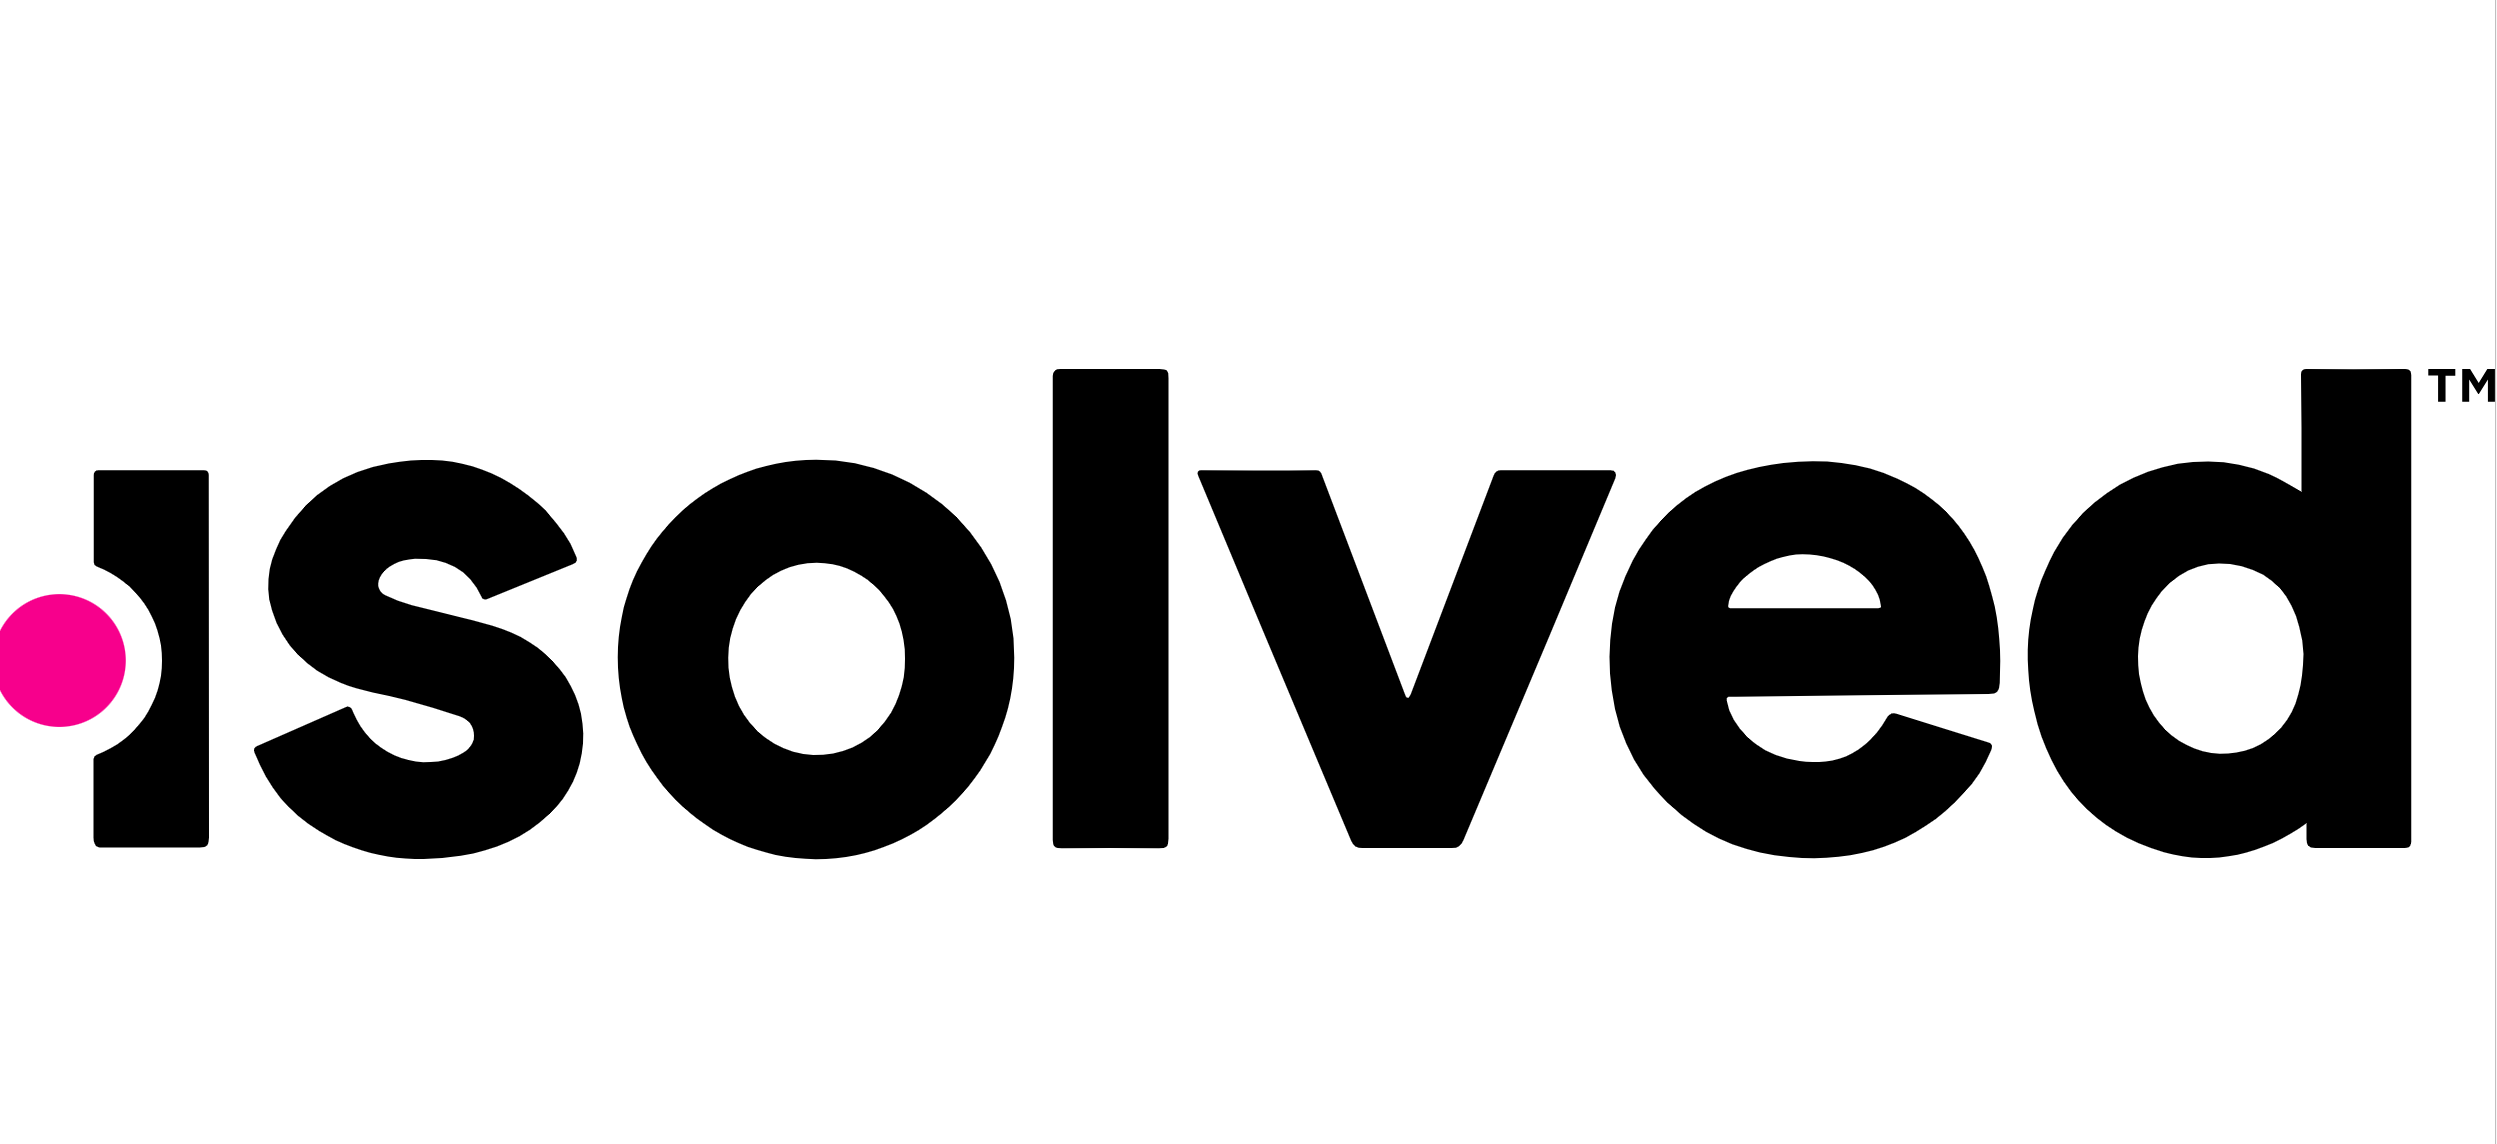 Review isolved: Employee experience leader providing people-first HCM tech - Appvizer